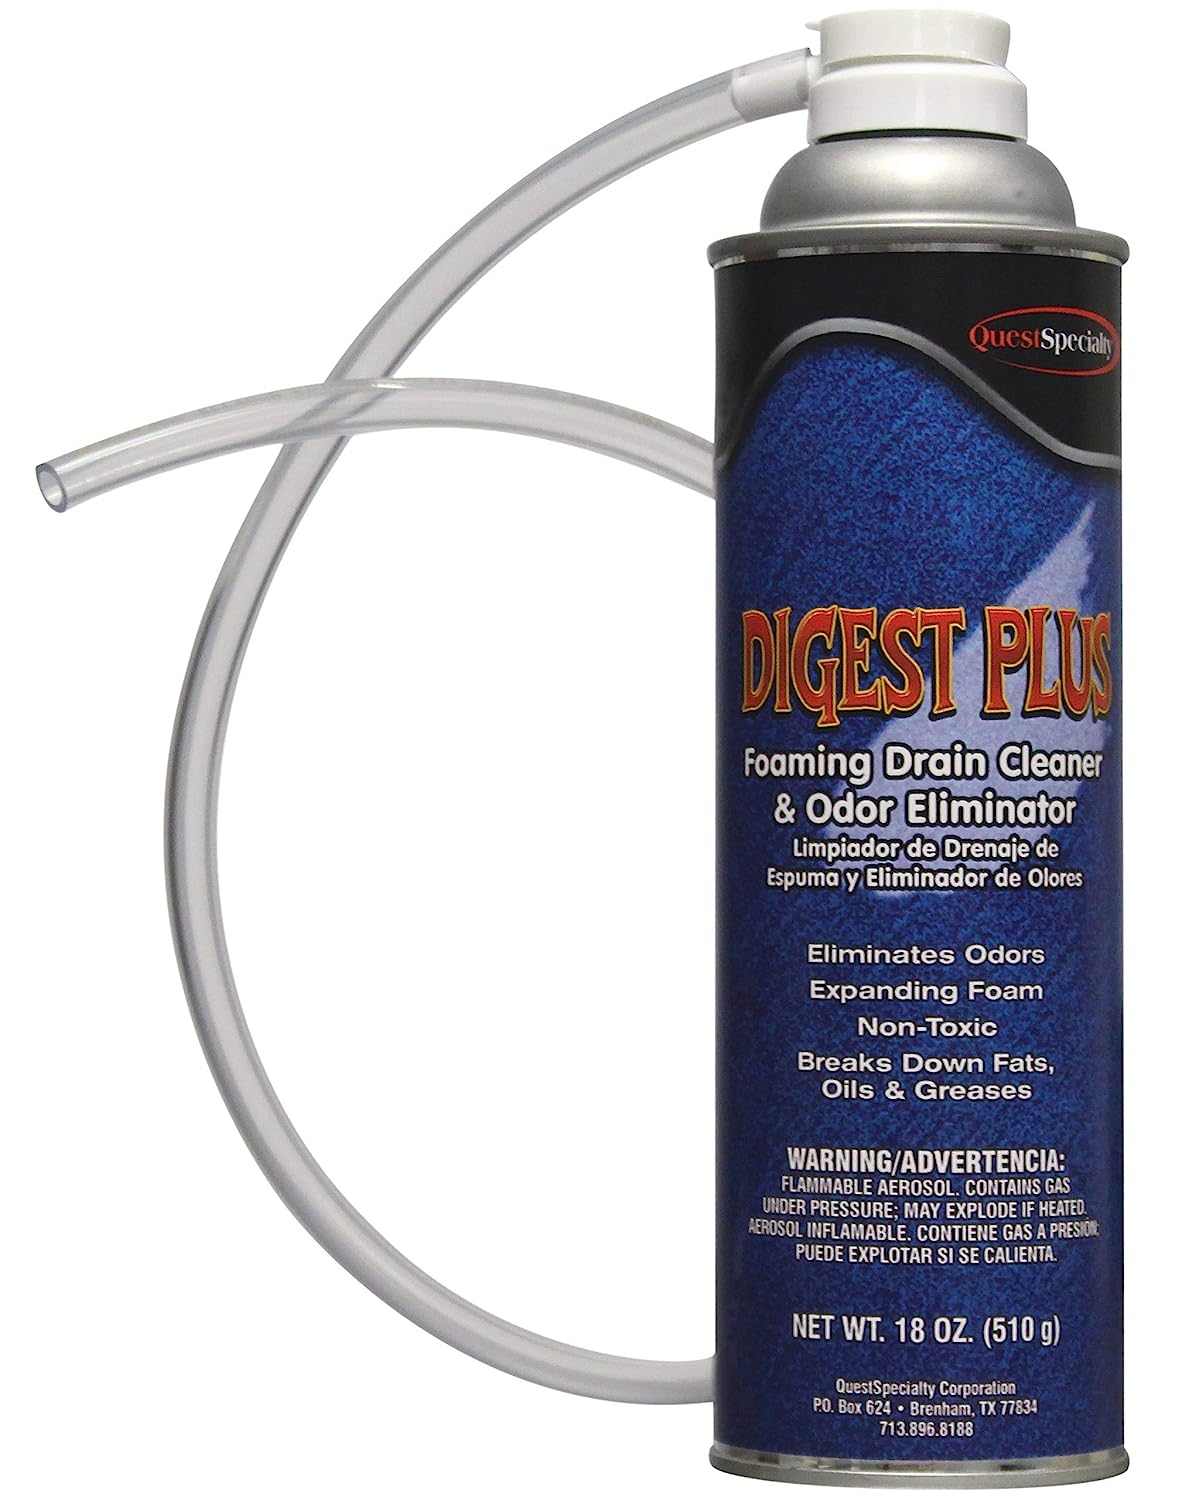 DIGEST PLUS Foaming Drain Cleaner and Odor Eliminator, [...]